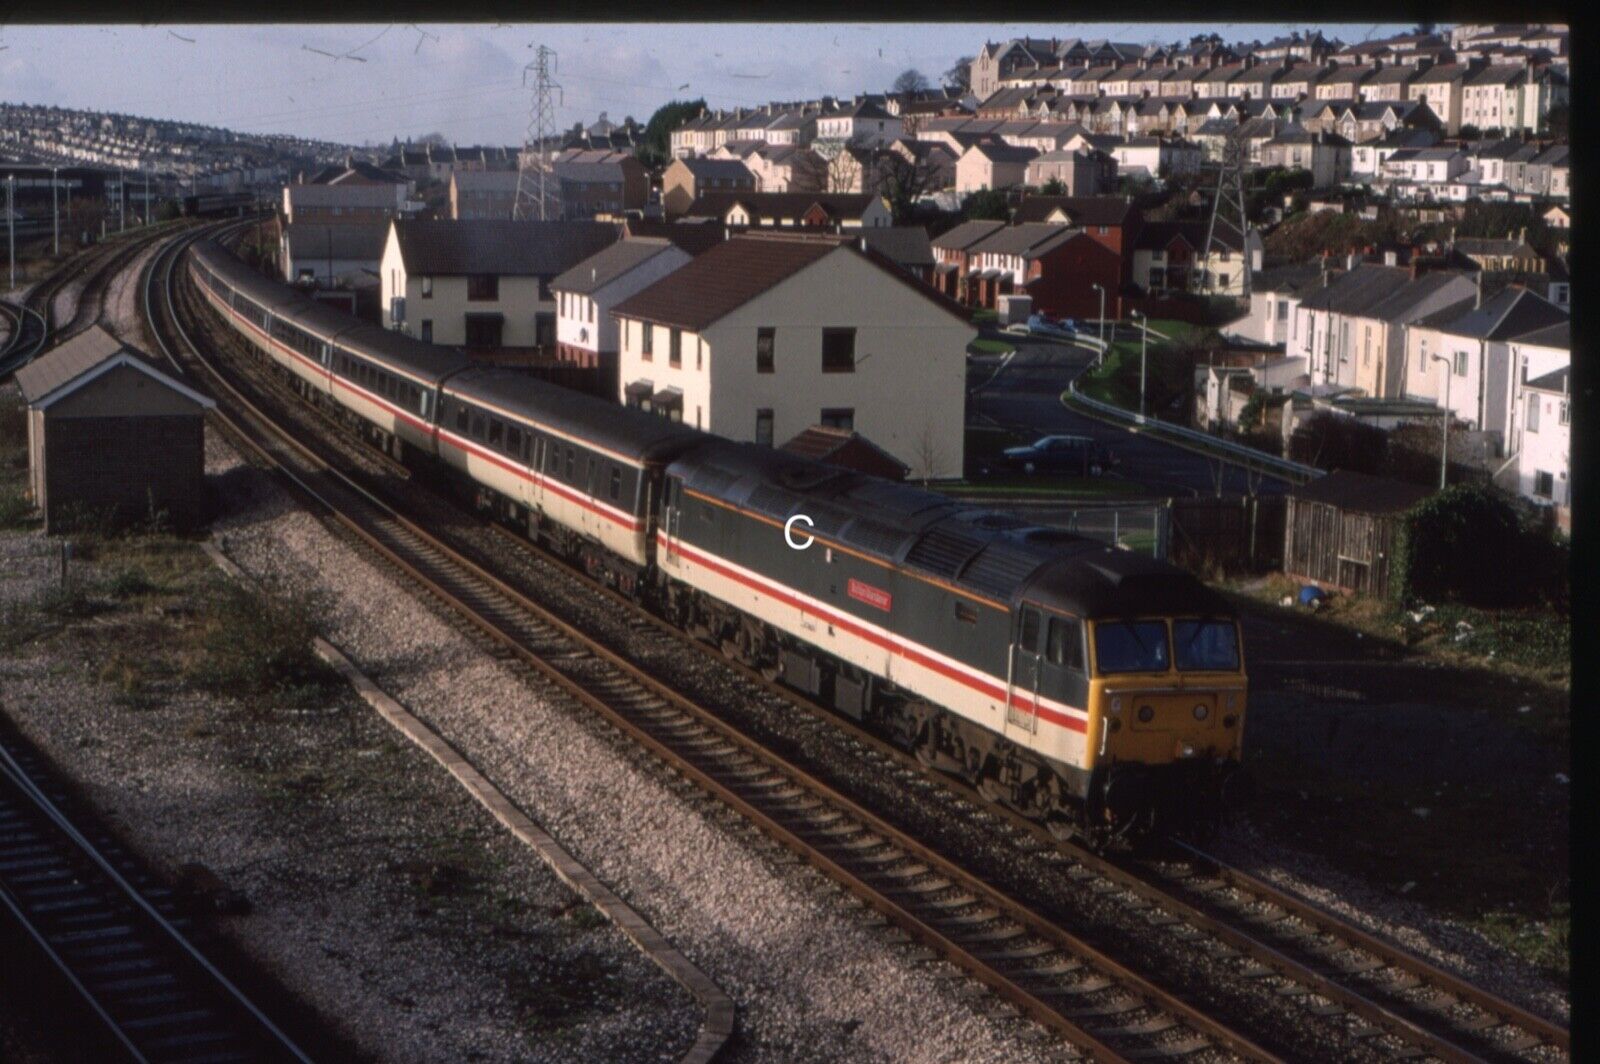 35MM SLIDE BRITISH RAILWAY BR CLASS 47 - 47831 AT PLYMOUTH LAIRA JCT 11/12/1993